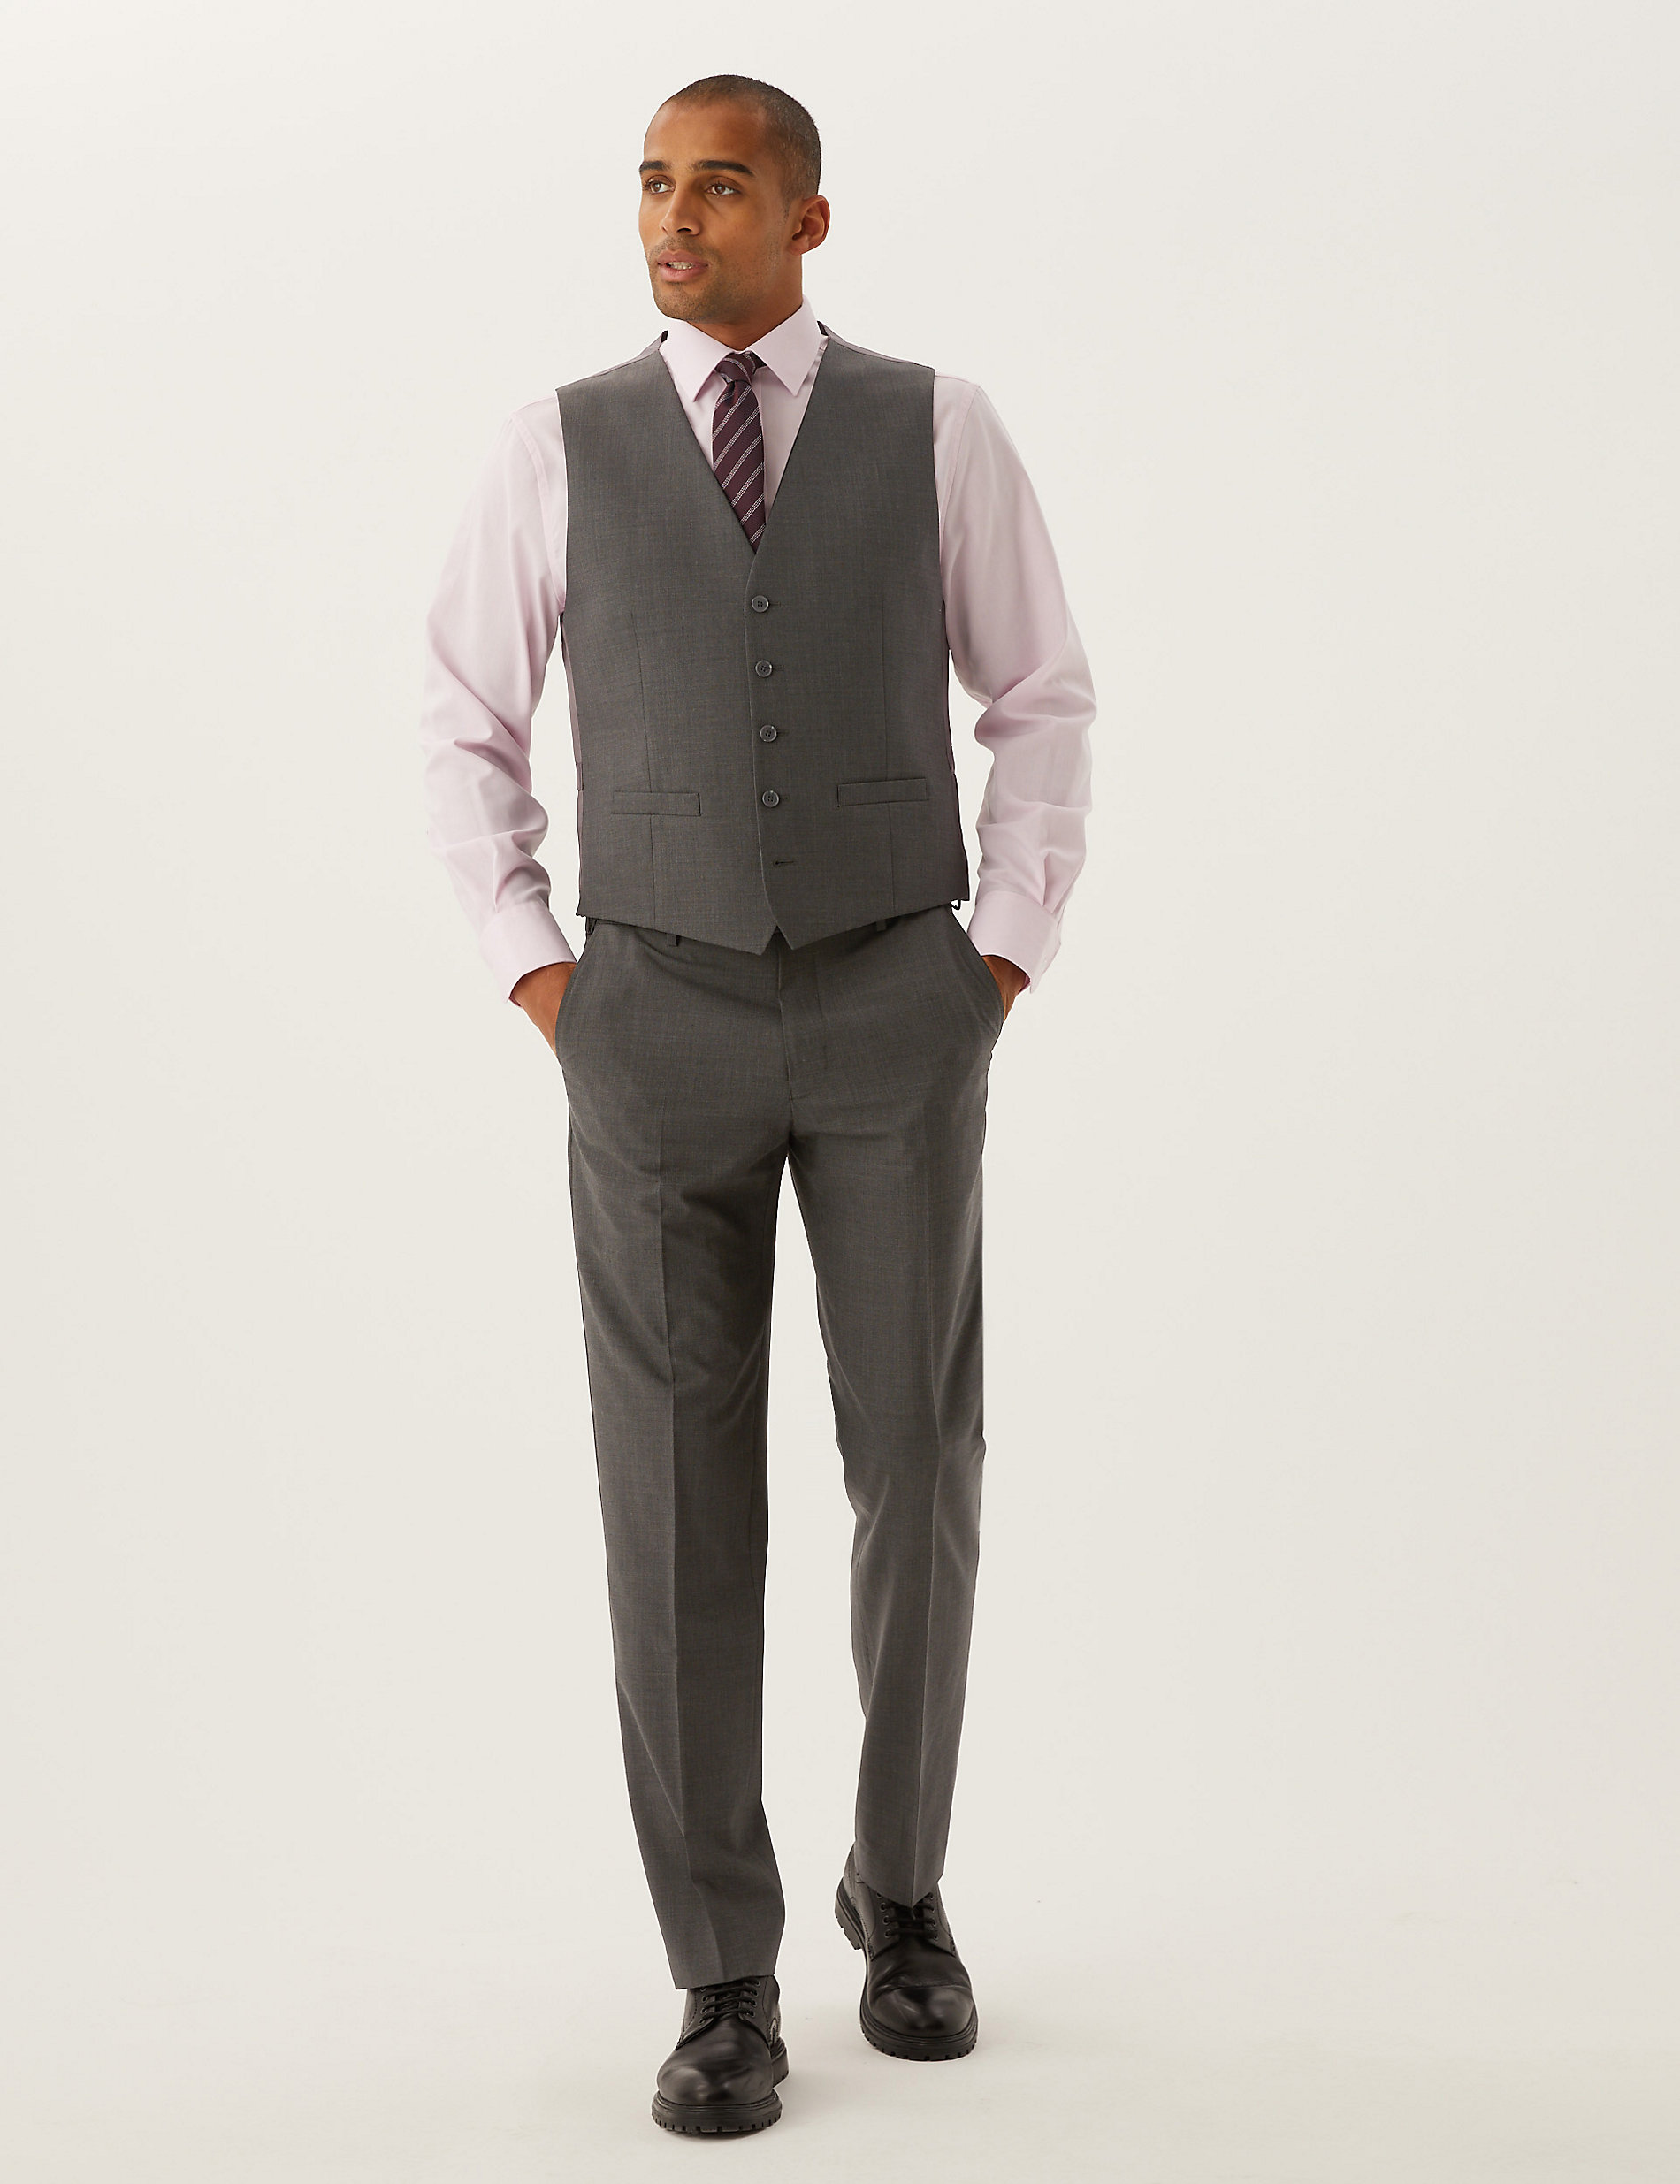 The Ultimate Charcoal Regular Fit 3 piece Suit